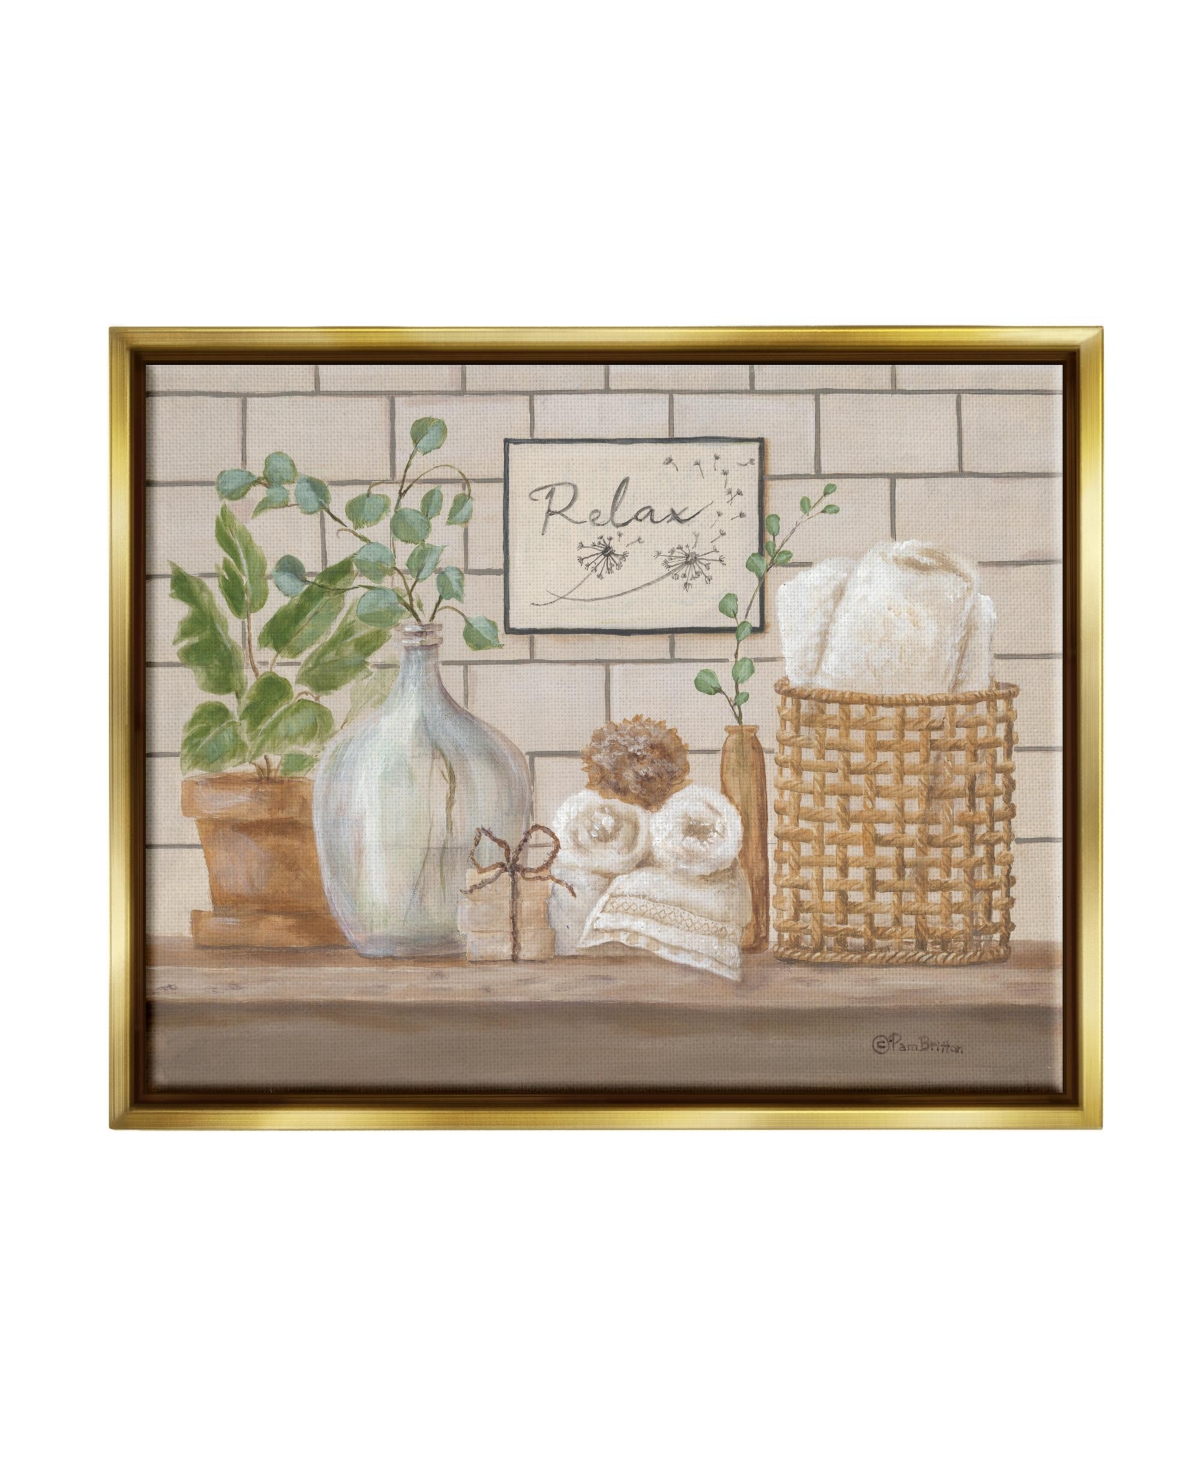 Stupell Industries Relax Uplifting Bathroom Scene Framed Floater Canvas Wall Art, 17" X 1.7" X 21" In Multi-color